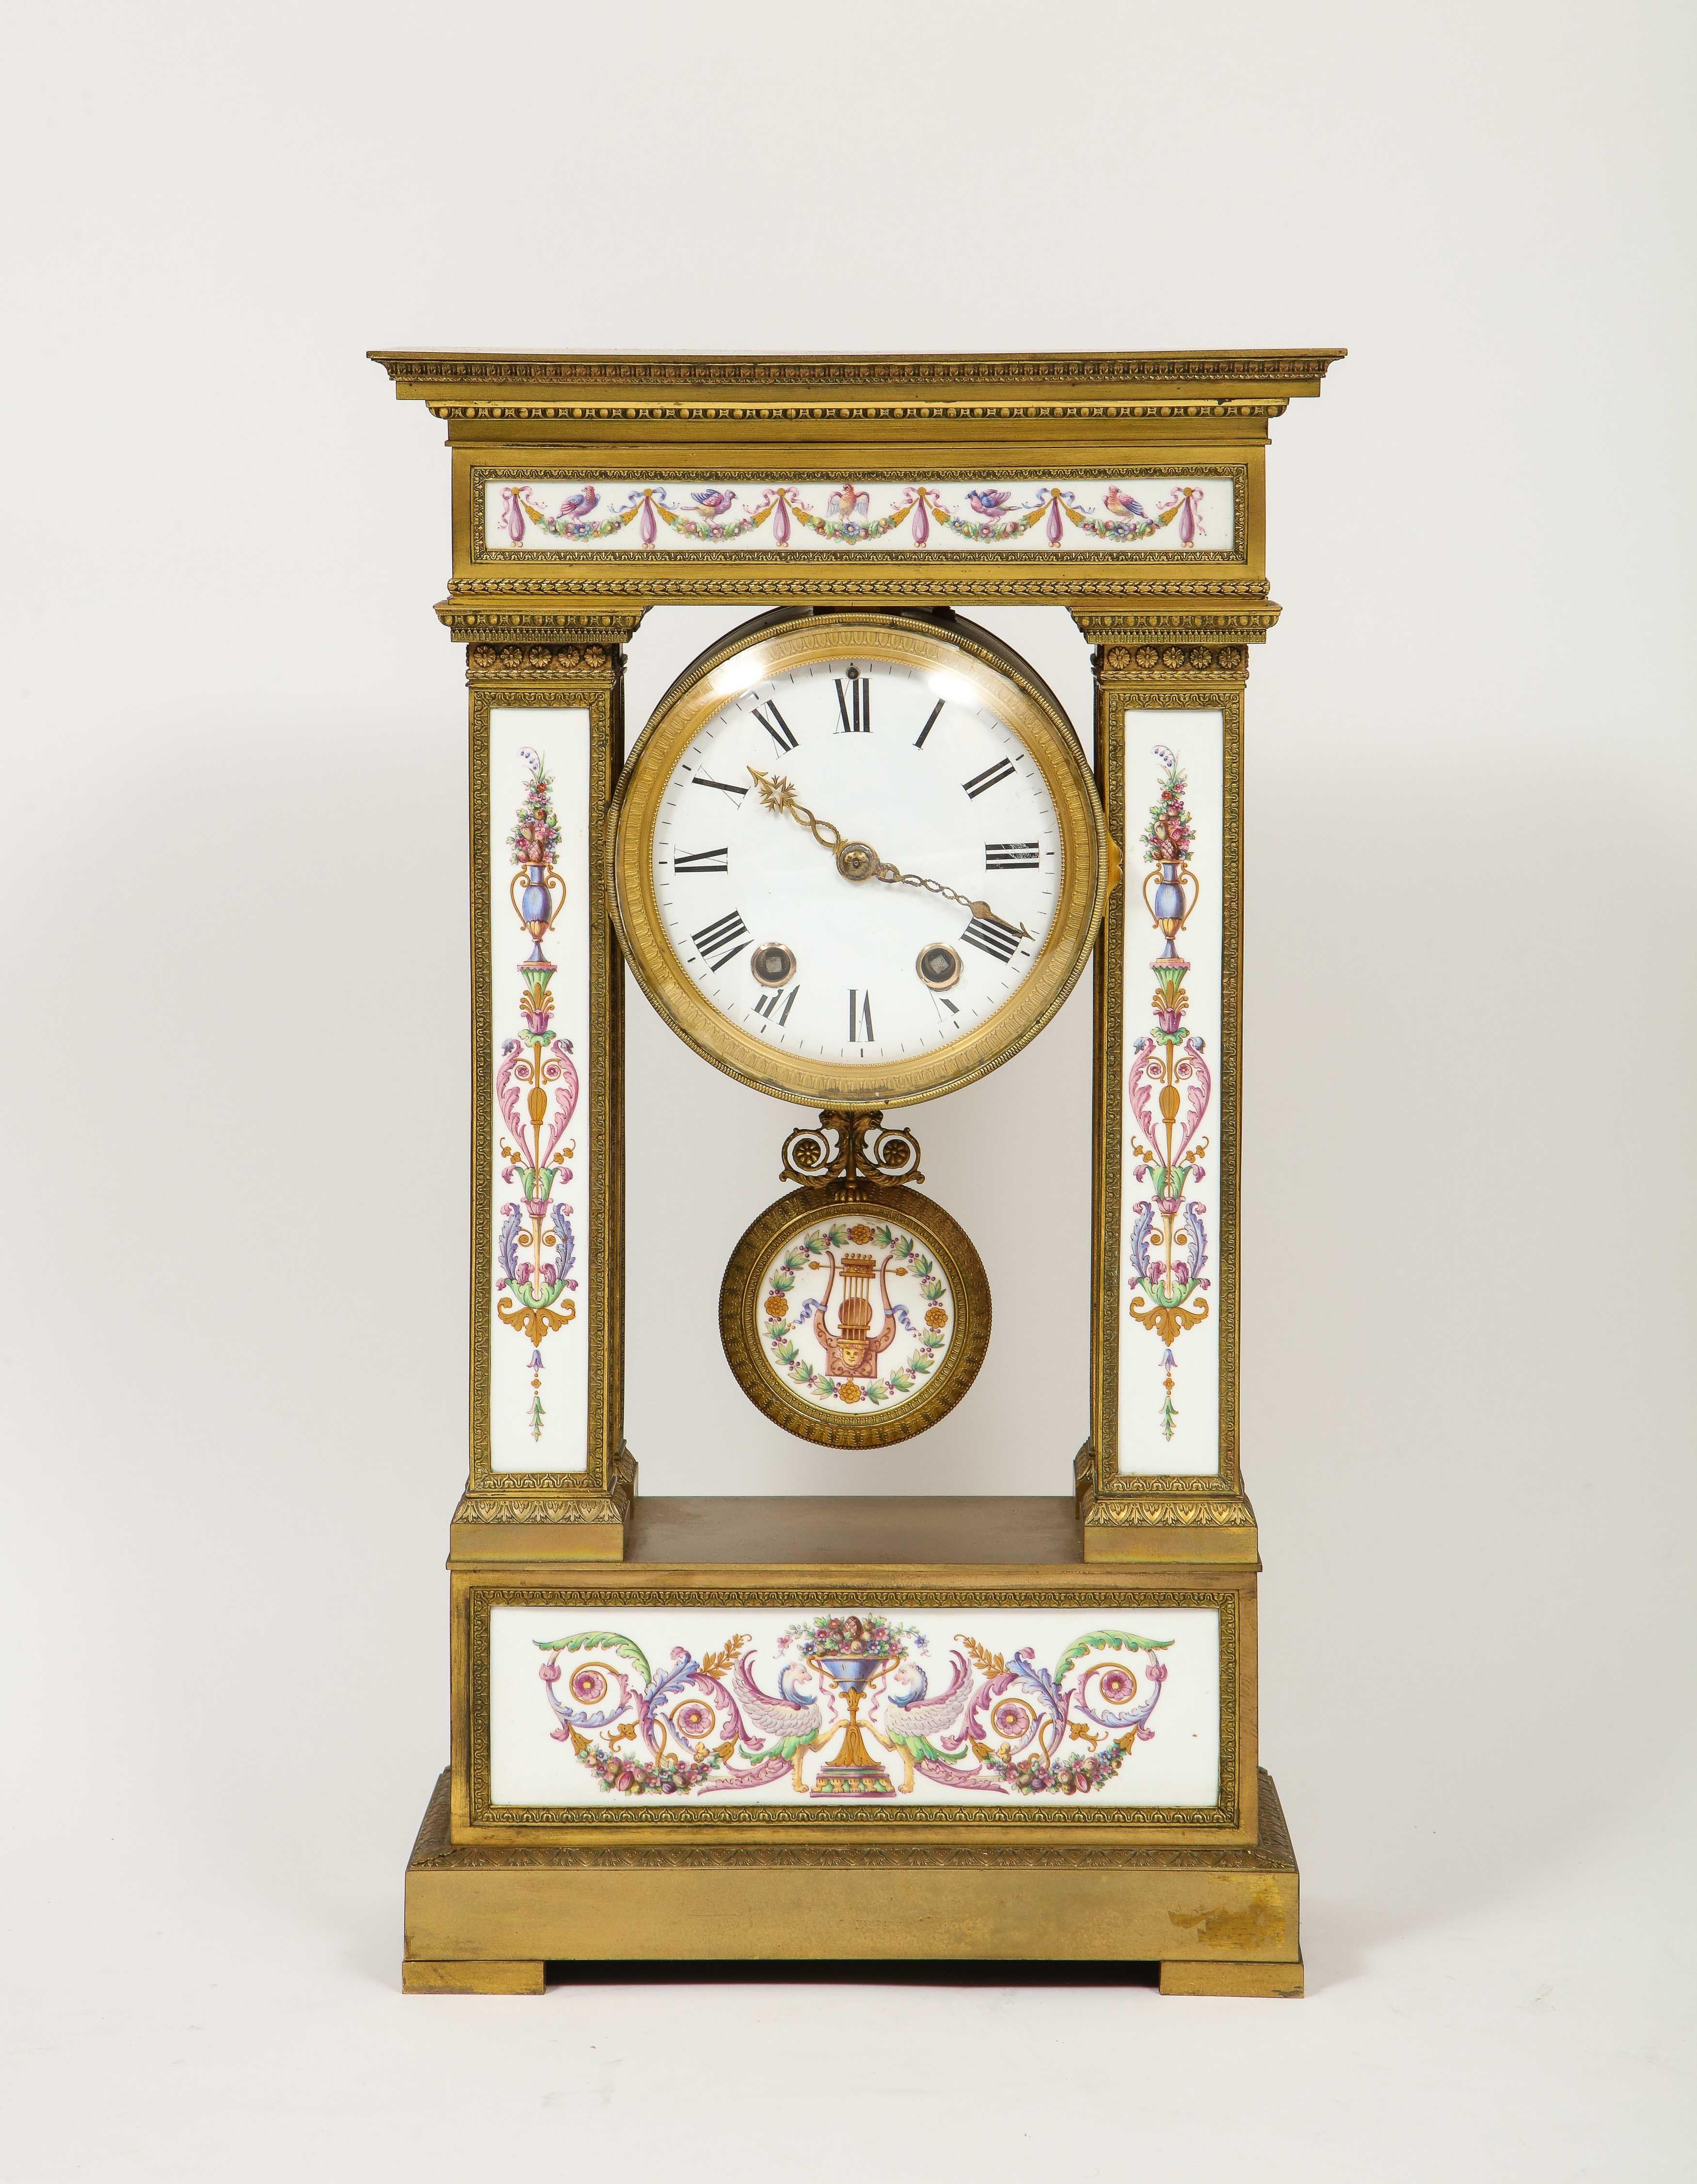 A Rare and Exquisite French Ormolu Bronze and Porcelain Clock, attributed to Jean Francois Deniere, 
circa 1810.

This large and elaborate clock is made of the finest quality ormolu and porcelain during the period. Of rectangular form, with